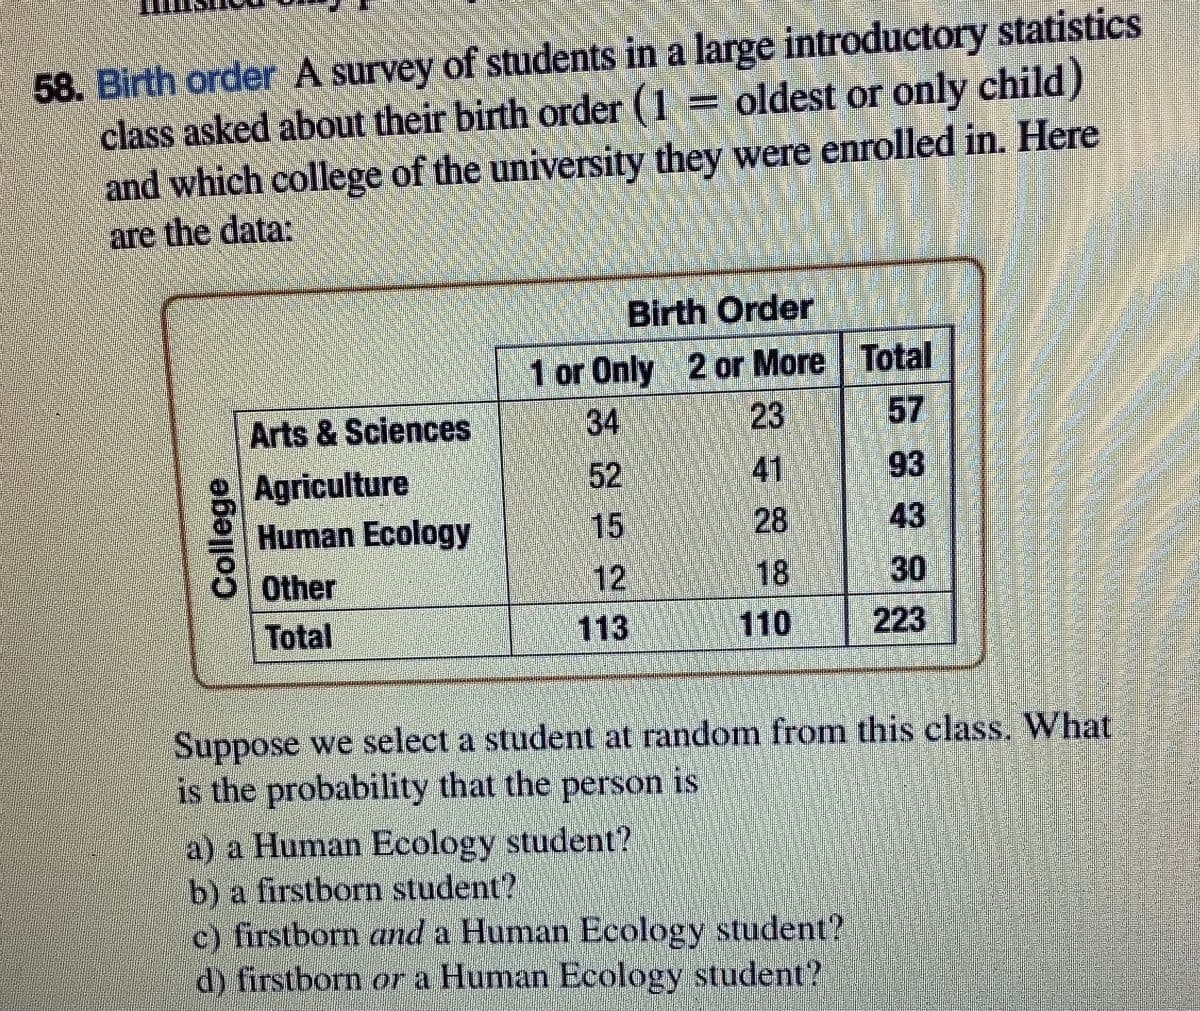 58. Birth order A survey of students in a large introductory statistics
class asked about their birth order (1 = oldest or only child)
and which college of the university they were enrolled in. Here
are the data:
Birth Order
1 or Only 2 or More Total
23
Arts & Sciences
34
57
41
93
Agriculture
Human Ecology
52
15
28
43
18
30
Other
Total
12
113
110
223
Suppose we select a student at random from this class. What
is the probability that the person is
a) a Human Ecology student?
b) a firstborn student?
c) firstborn and a Human Ecology student?
d) firstborn or a Human Ecology student?
College
